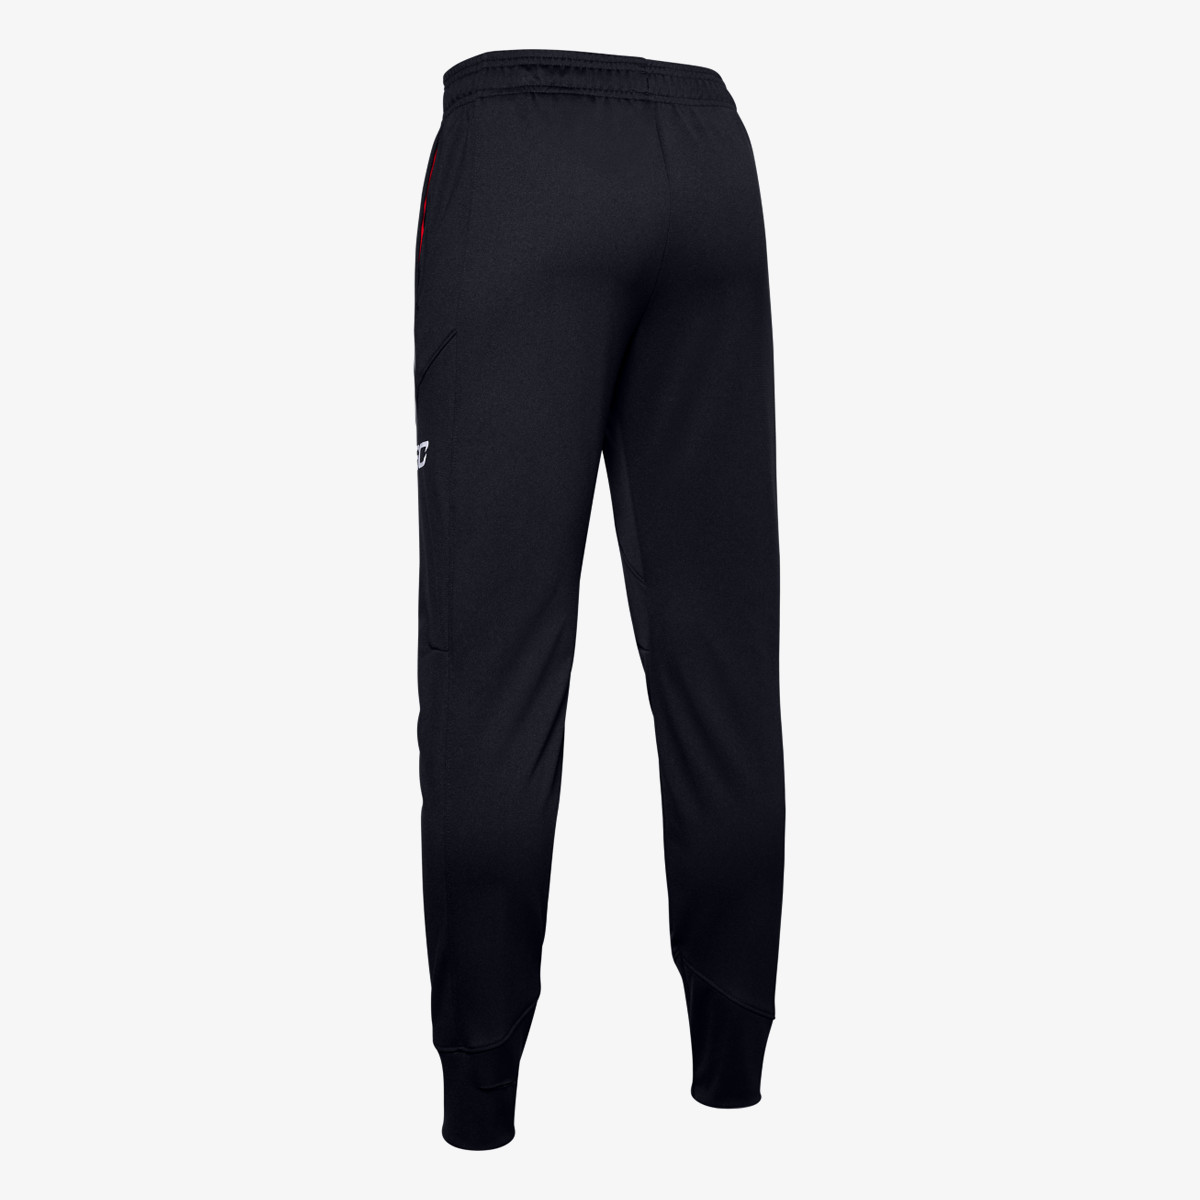 Under Armour Curry Warm Up Pants 